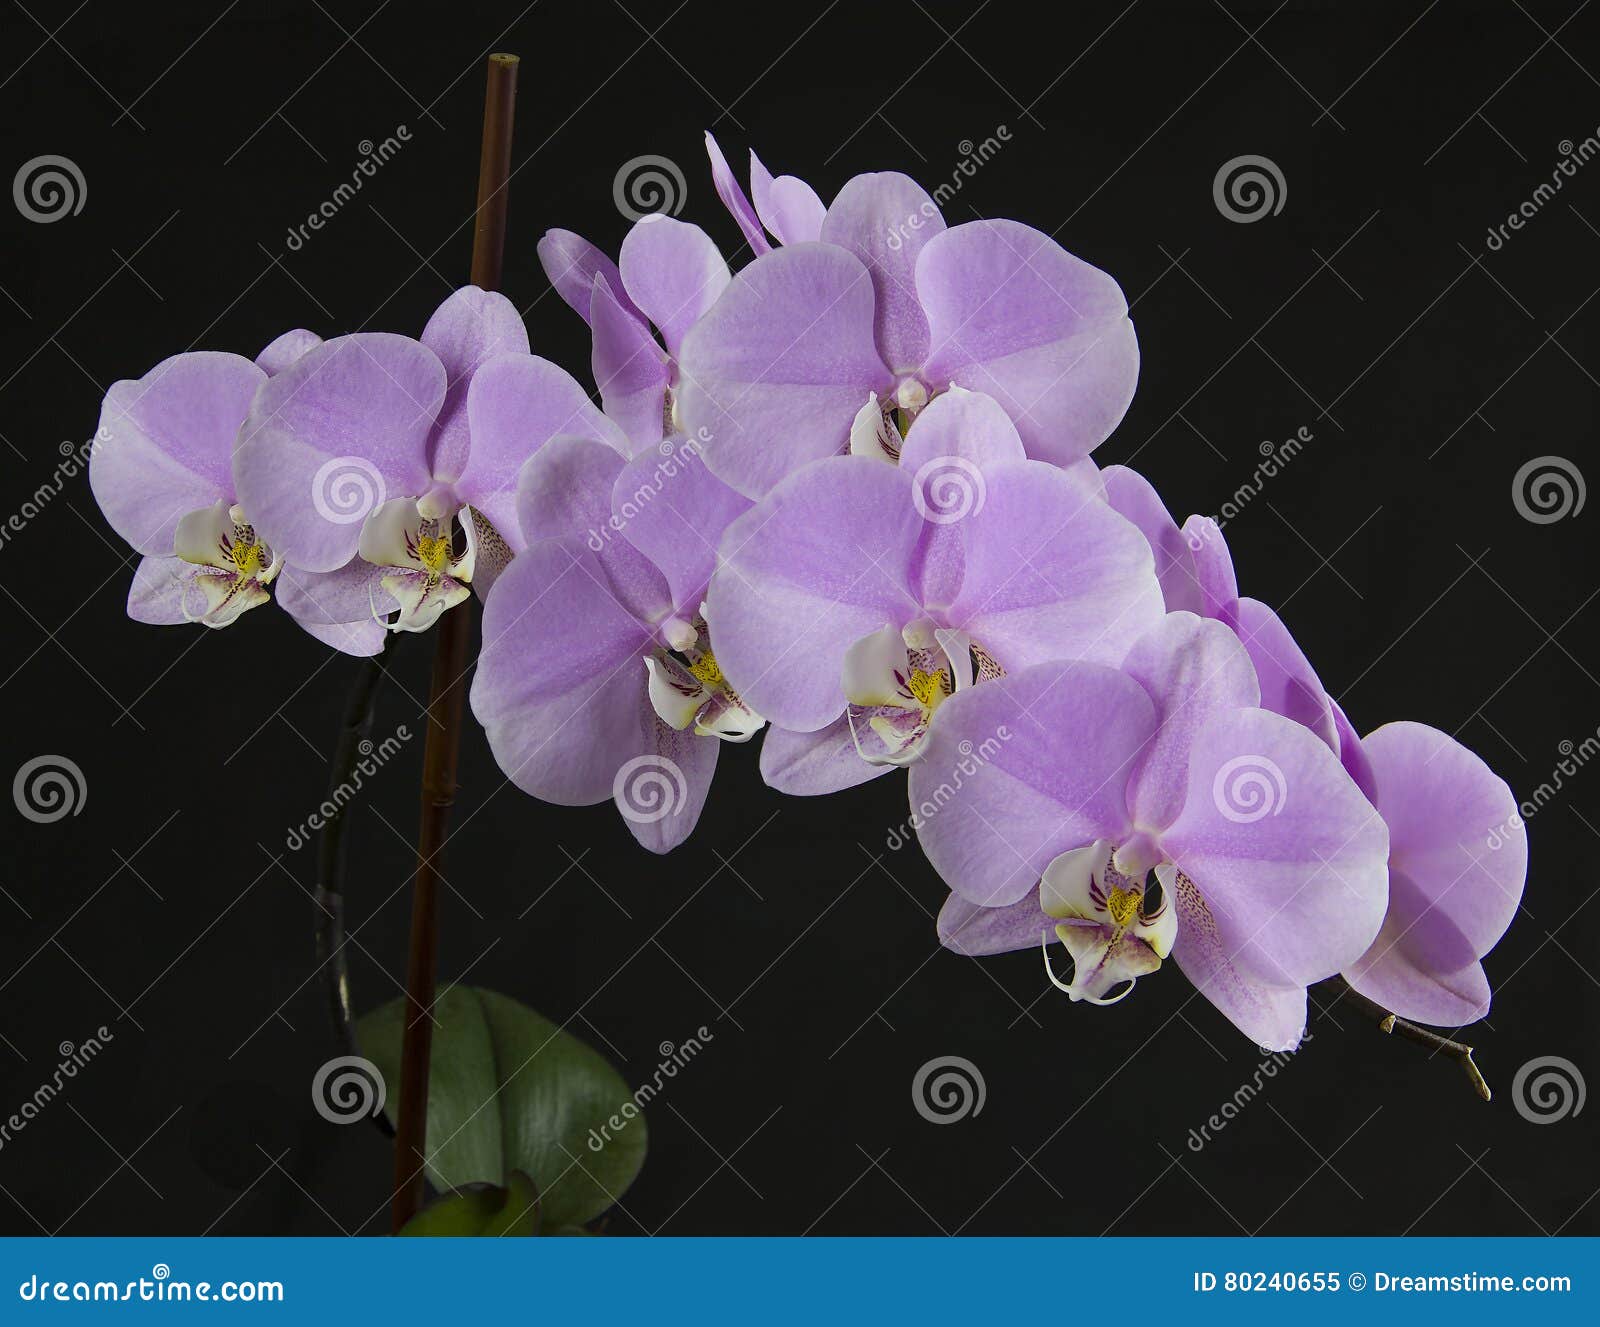 stacked orchid.